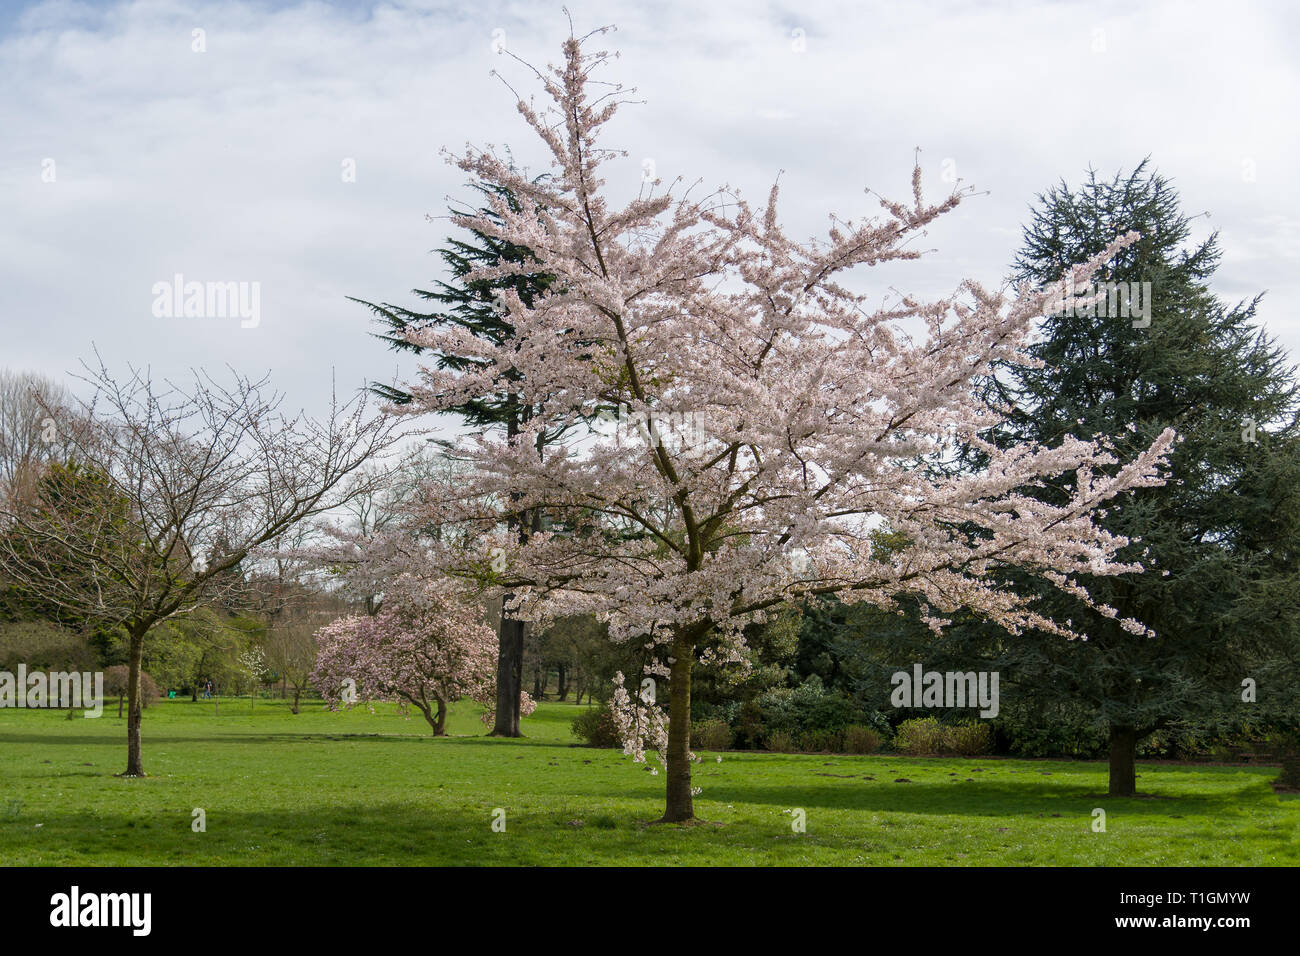 An apple blossom tree in full bloom in Bute park Cardiff, UK Stock Photo